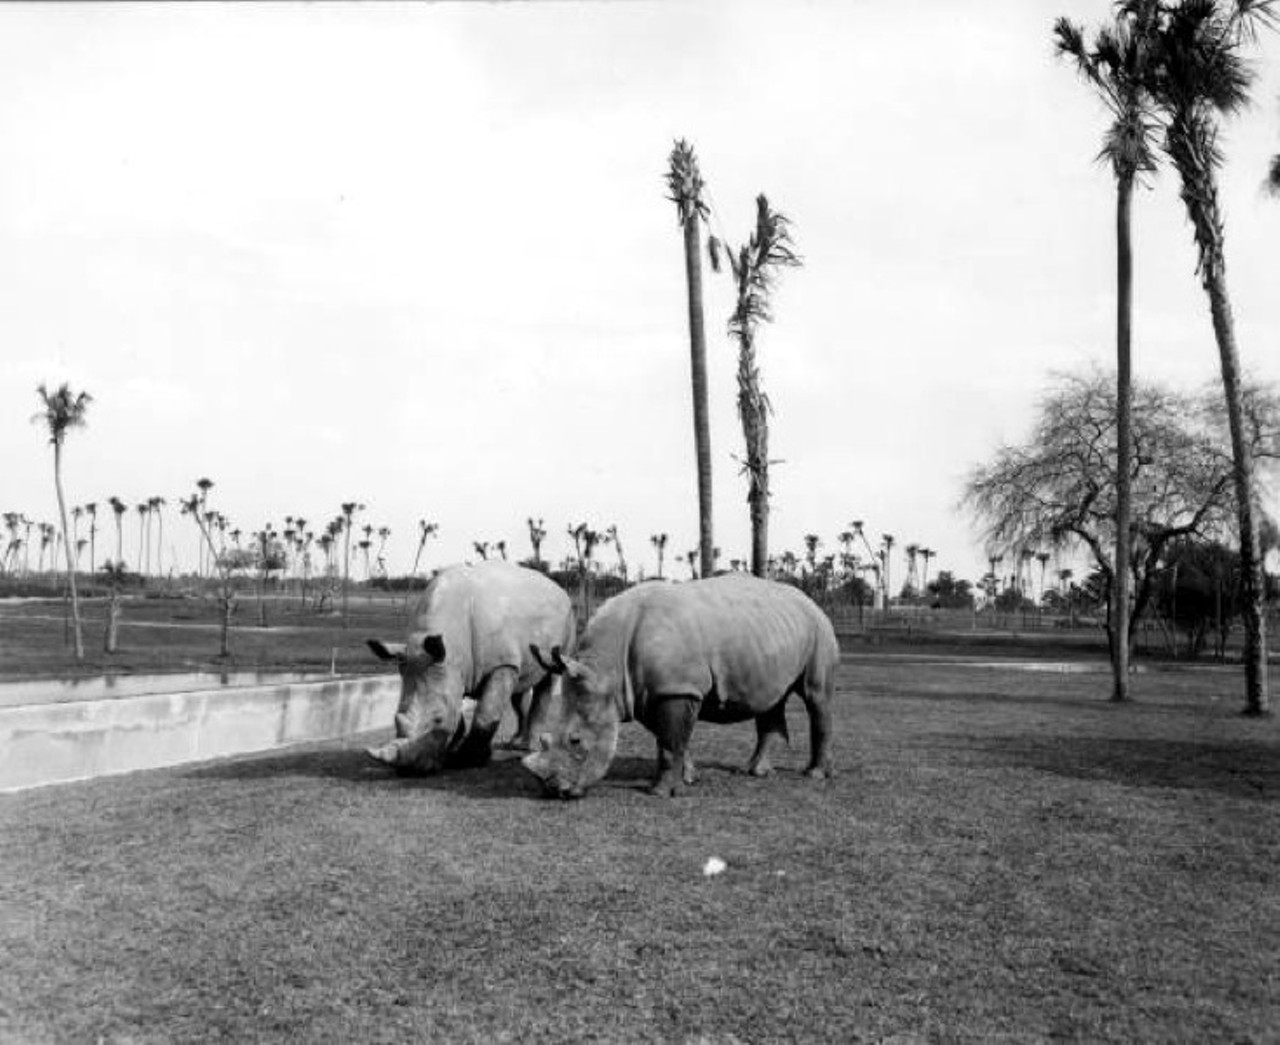 Busch Gardens
Tampa's own Busch Gardens had exotic wildlife on display way before Disney World opened its Animal Kingdom. These two rhinos caught hanging out in 1965 were just some of the nonnative animals tourists could admire.